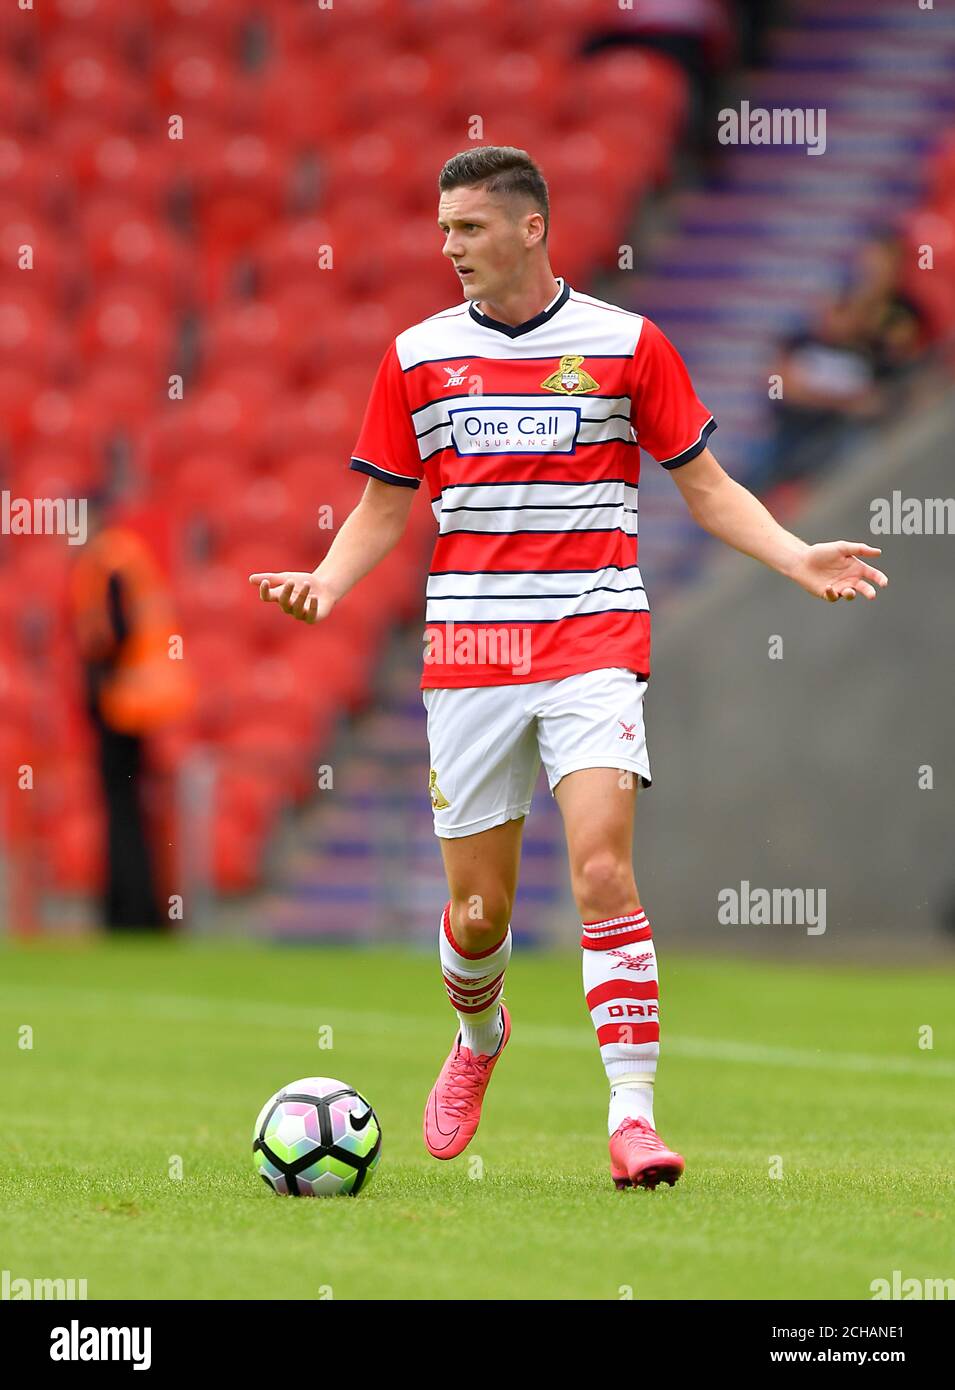 Harry Middleton, Doncaster Rovers. Stock Photo